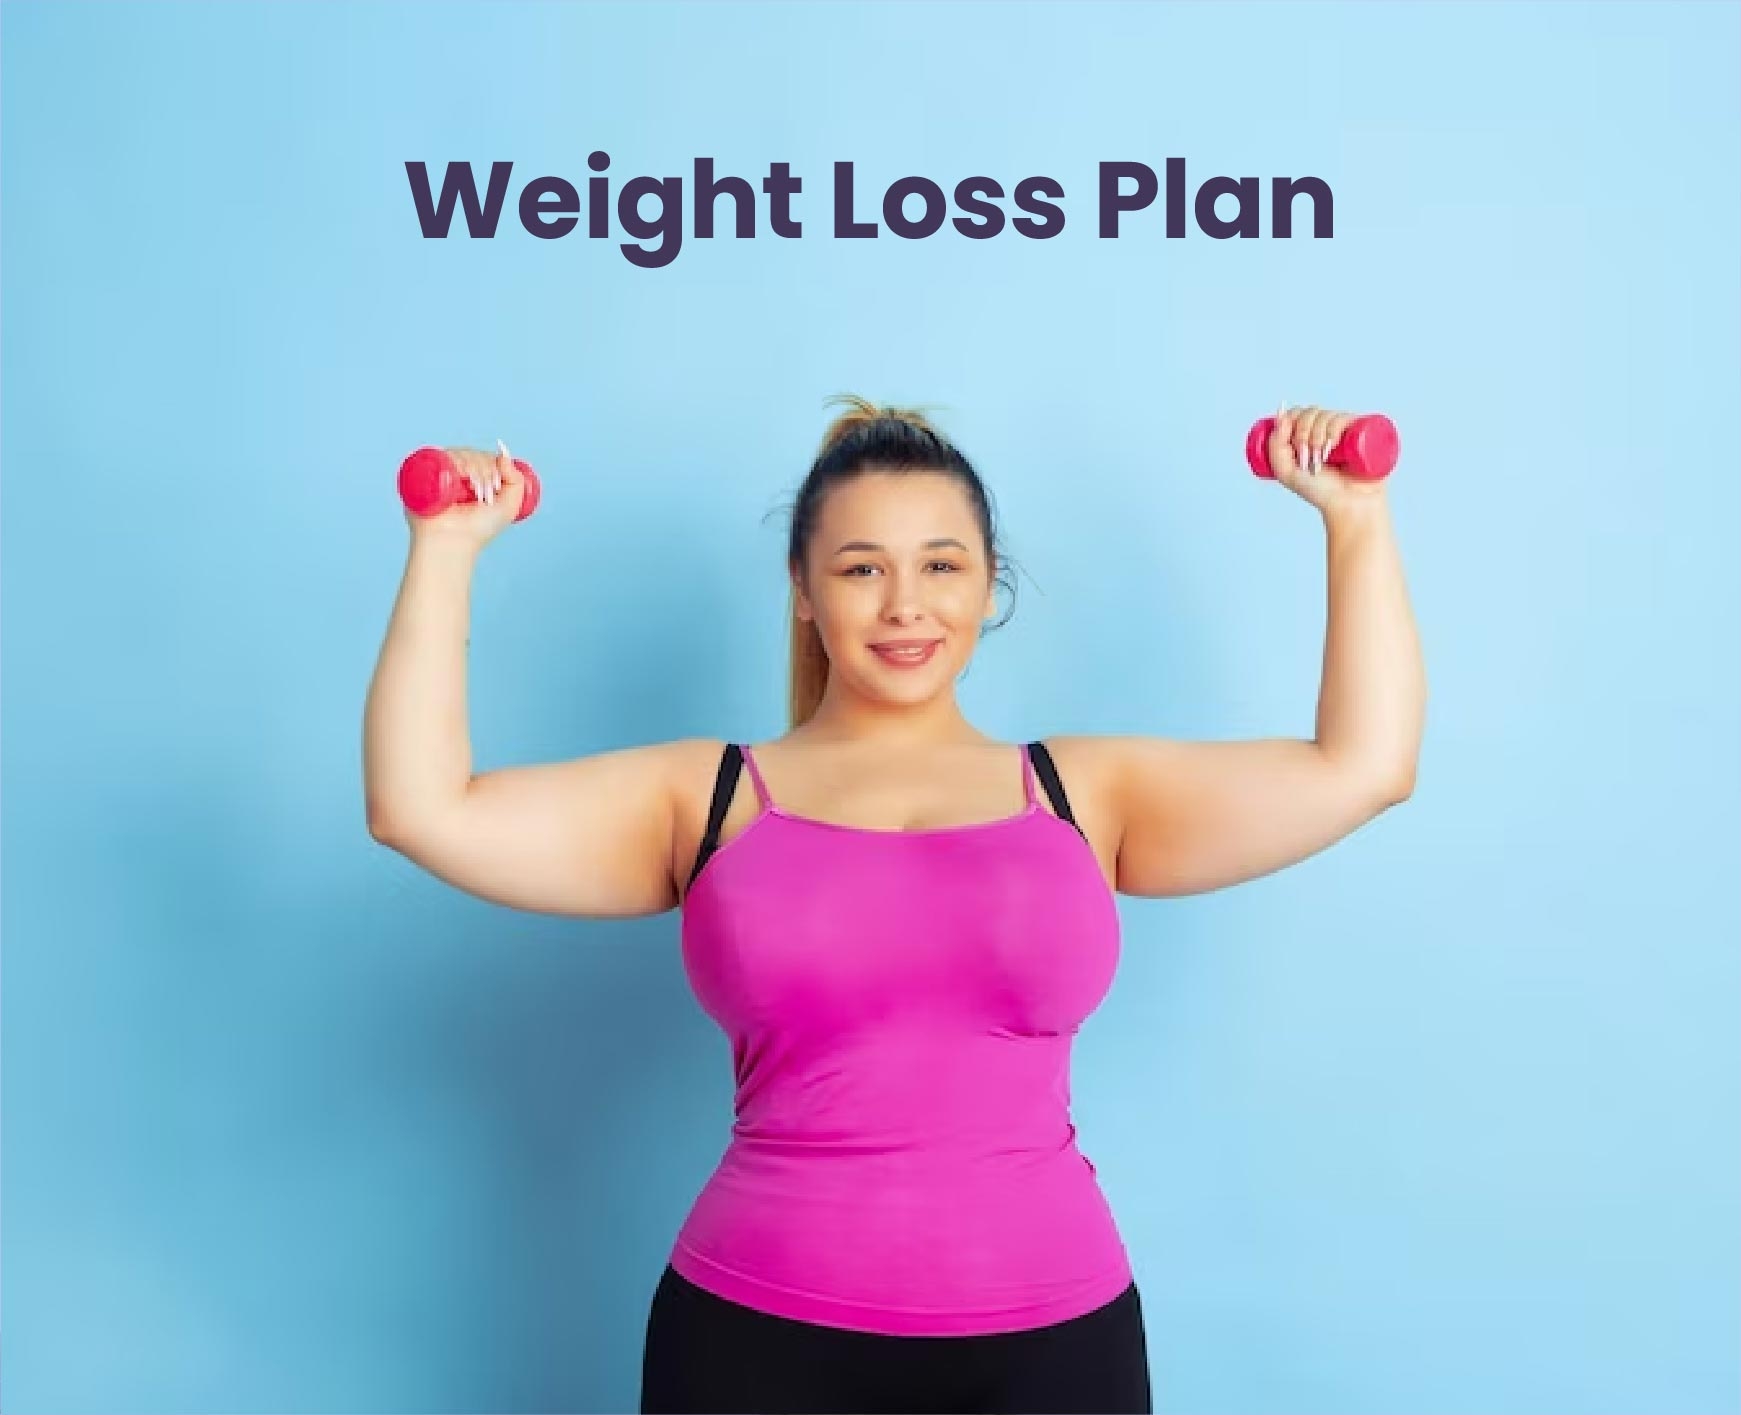 Get Customised Weight Loss Plan Diet from ToneOp - Top Health related Apps in India